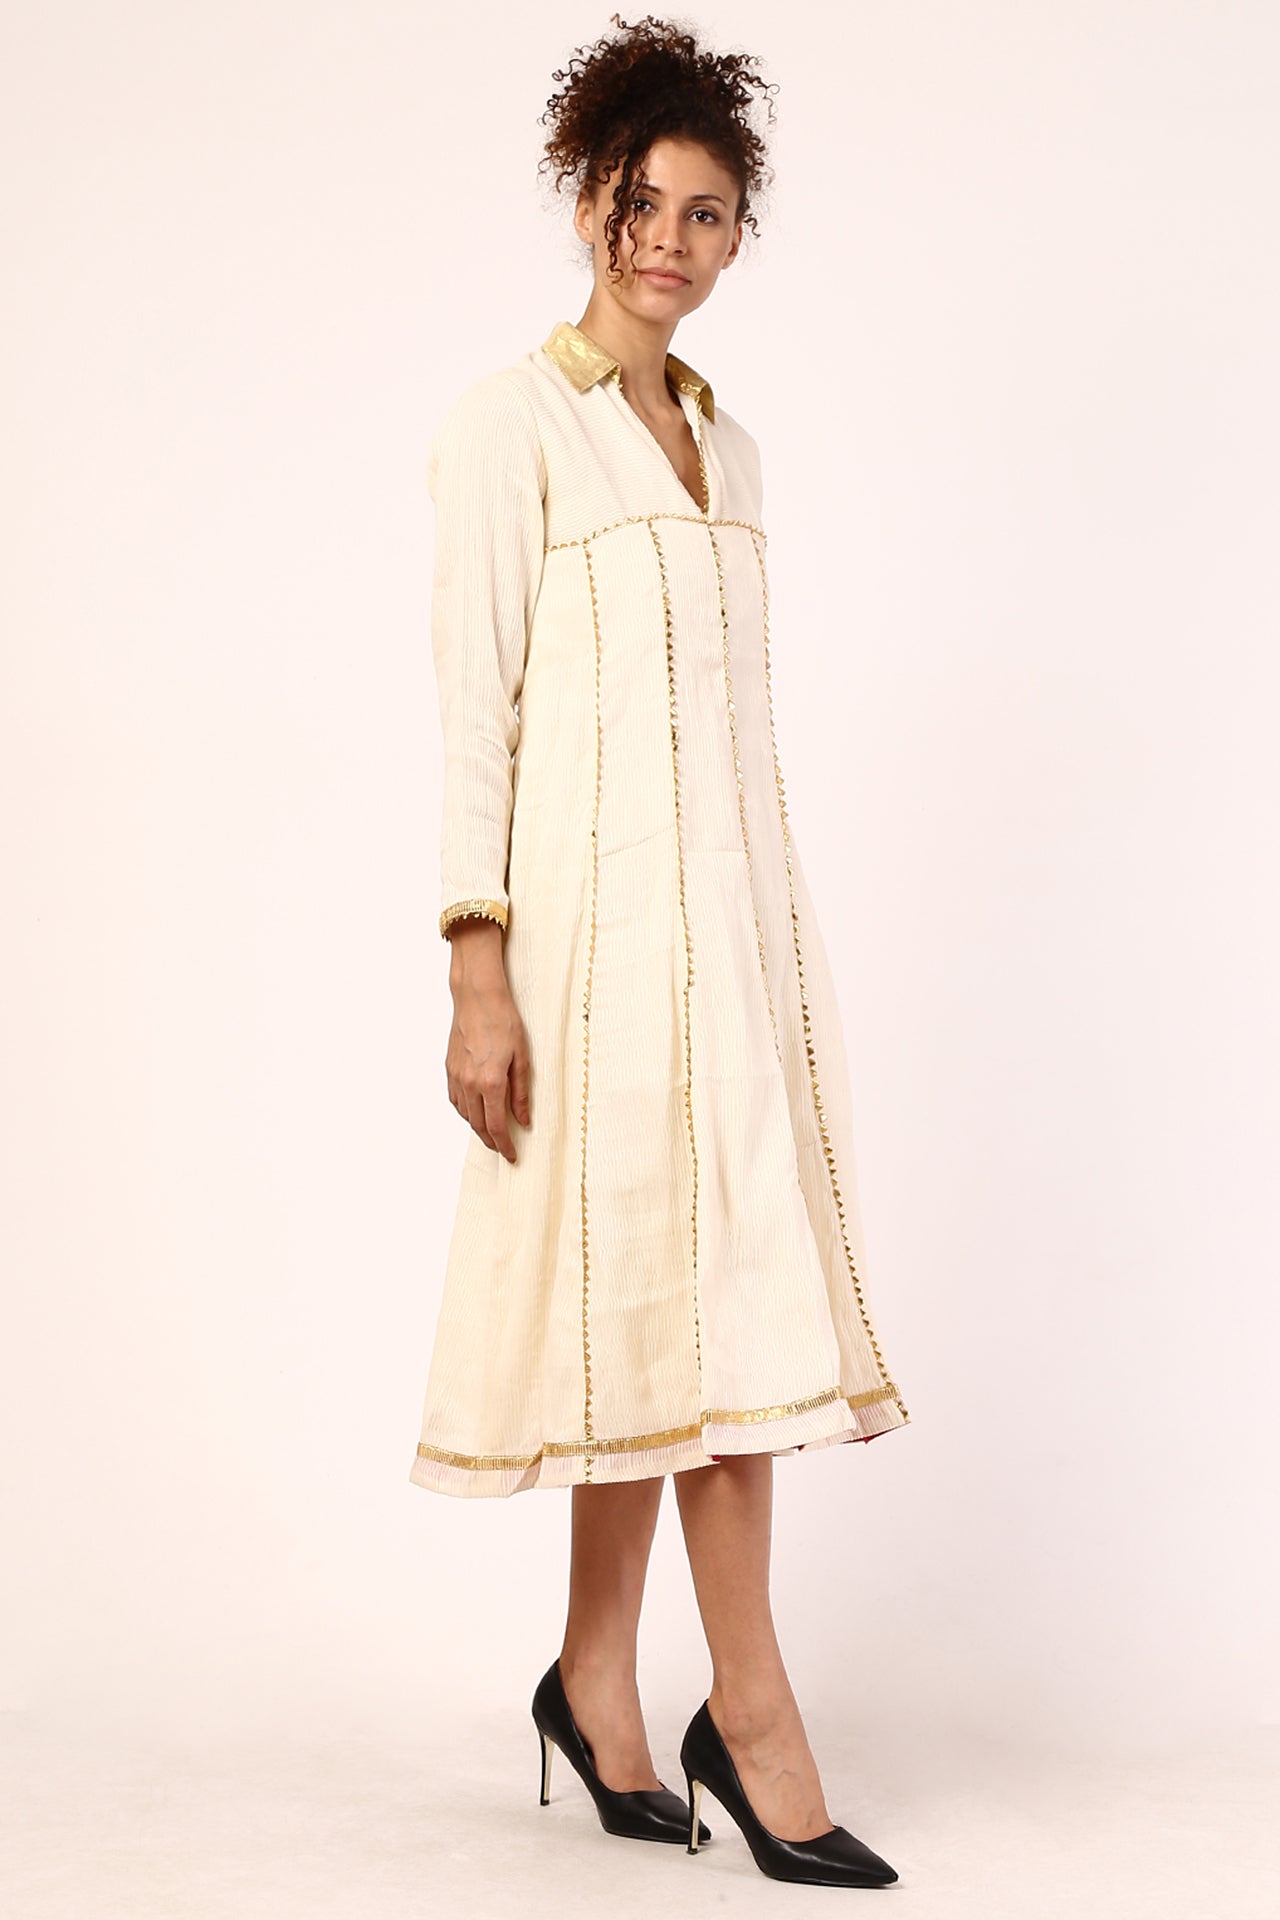 AMODINI OFF-WHITE WITH GOLDEN LACE BLENDED FLARED DRESS